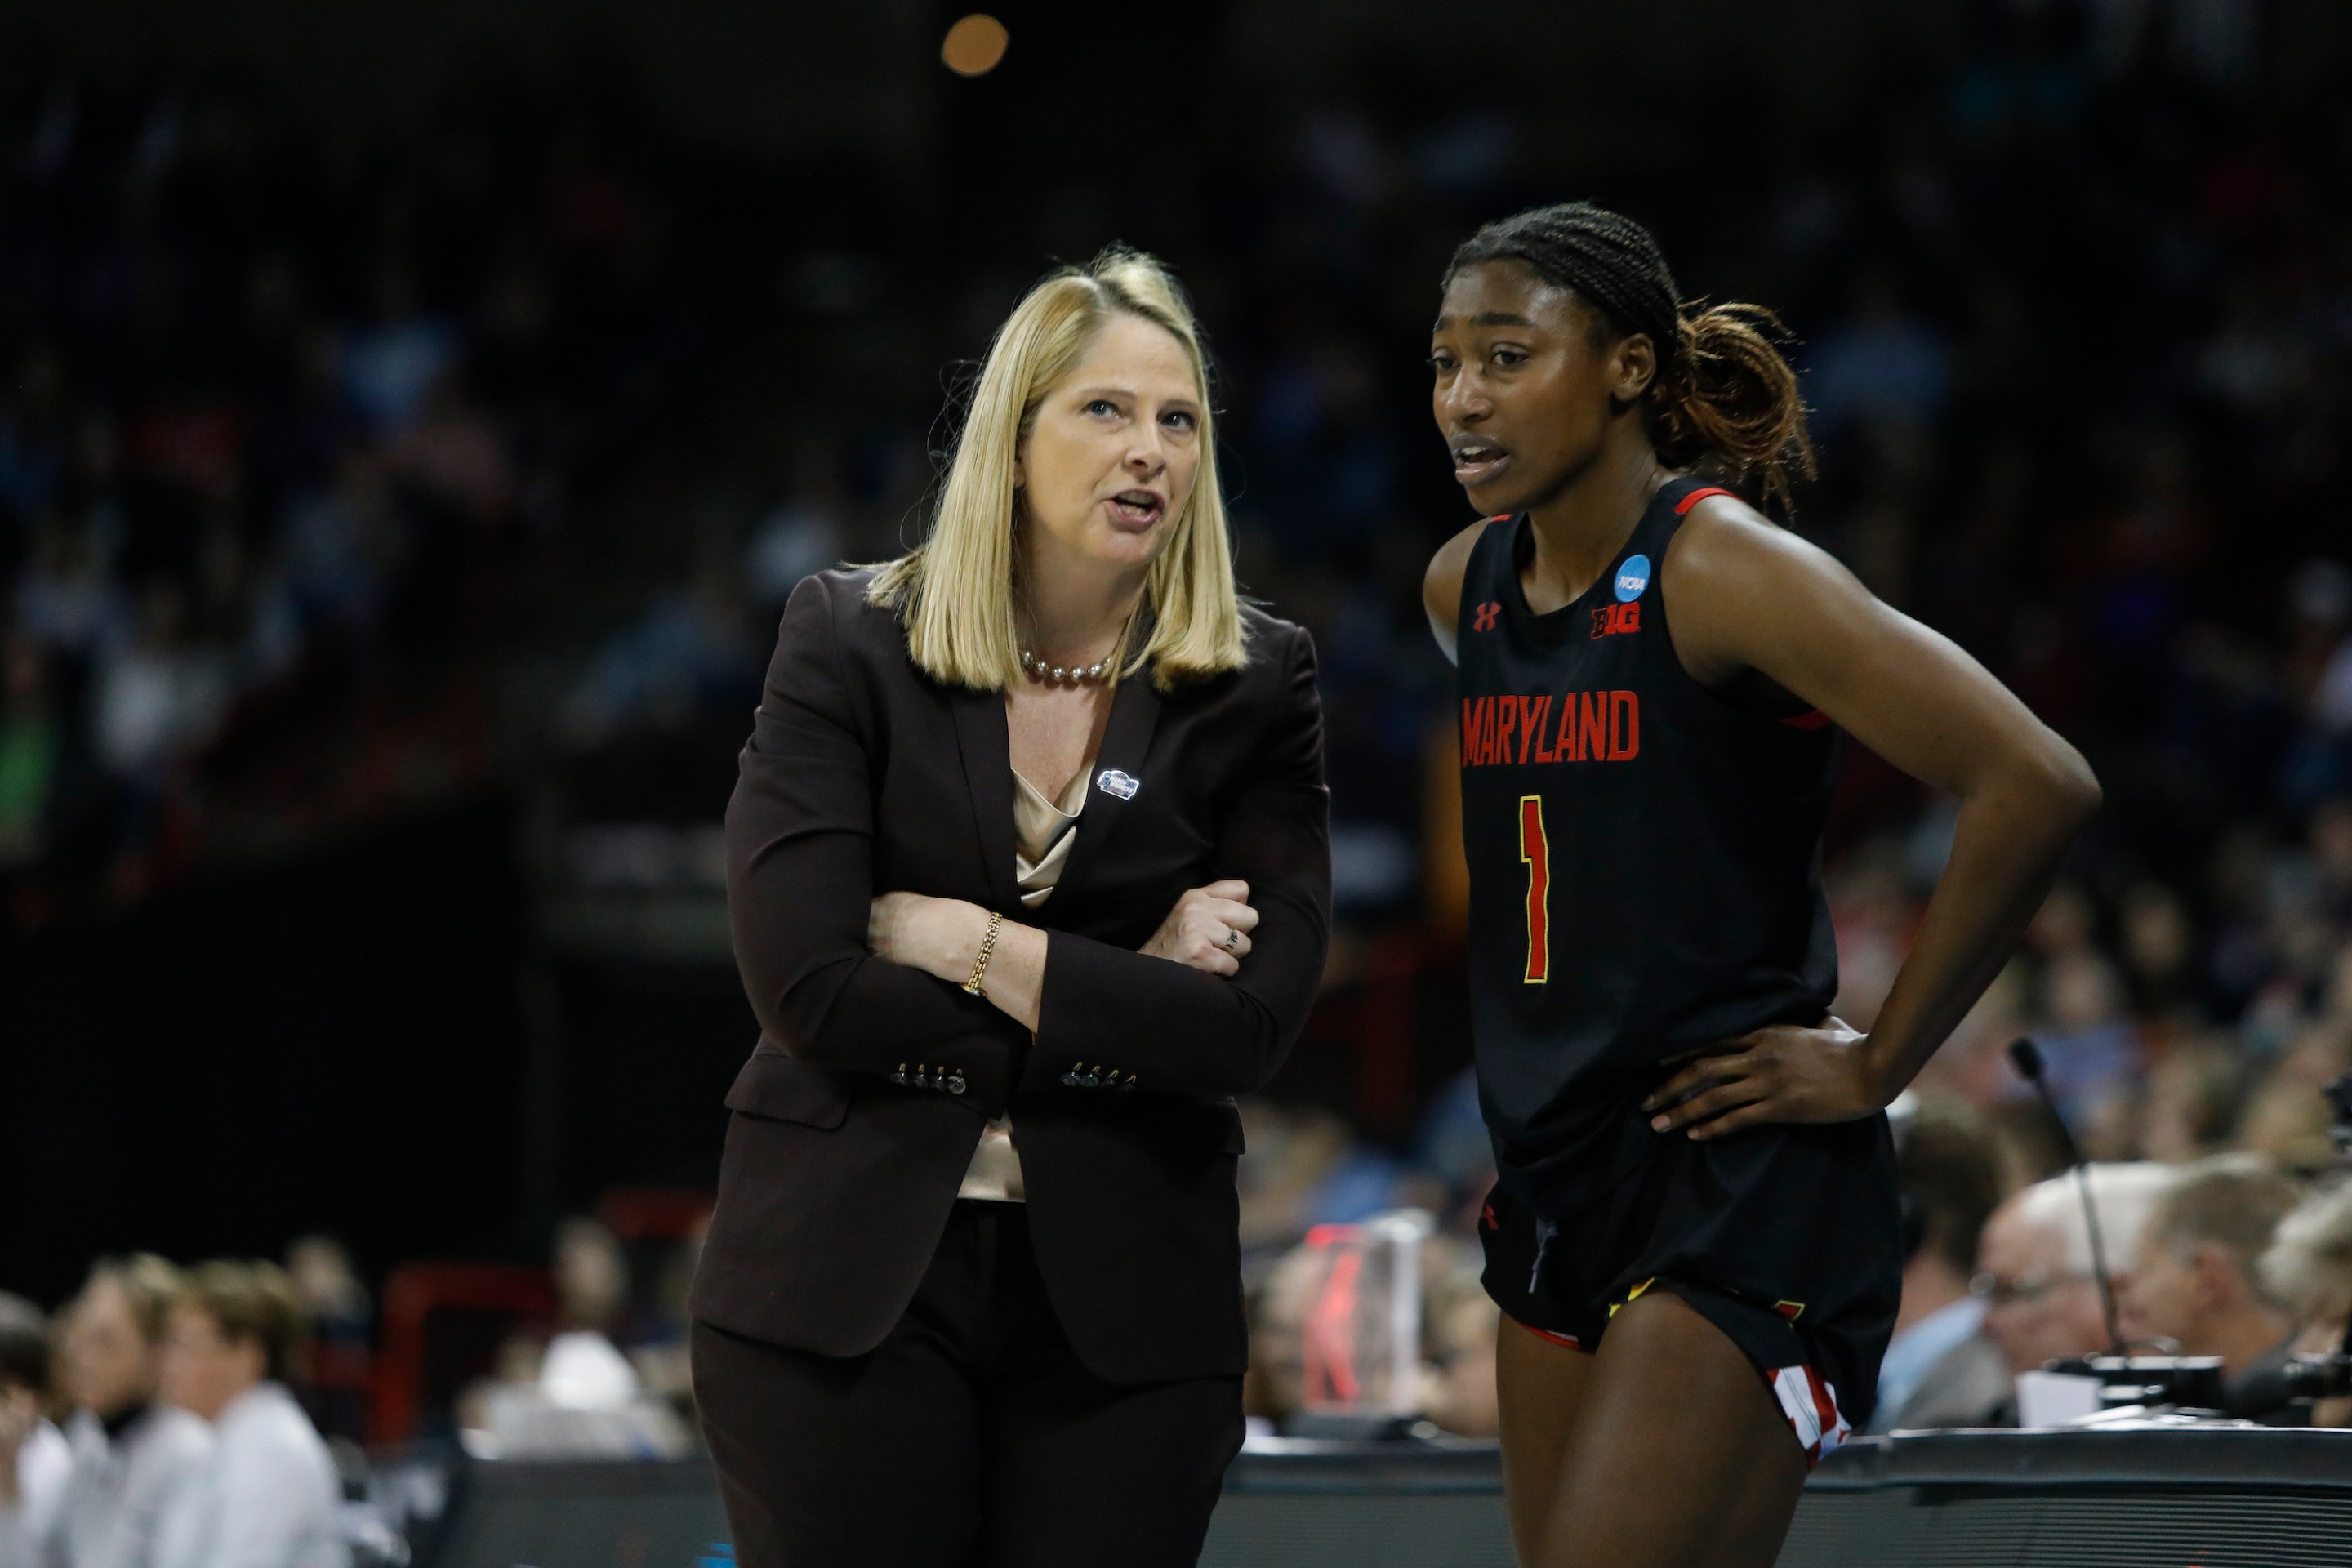 Maryland Terrapins head coach Brenda Frese talks to Maryland Terrapins guard Diamond Miller (1) during the NCAA Division I Women’s Basketball Championship sweet sixteen round game between the Stanford Cardinal and the Maryland Terrapins on March 25, 2022, at Spokane Veterans Memorial Stadium in Spokane, WA.